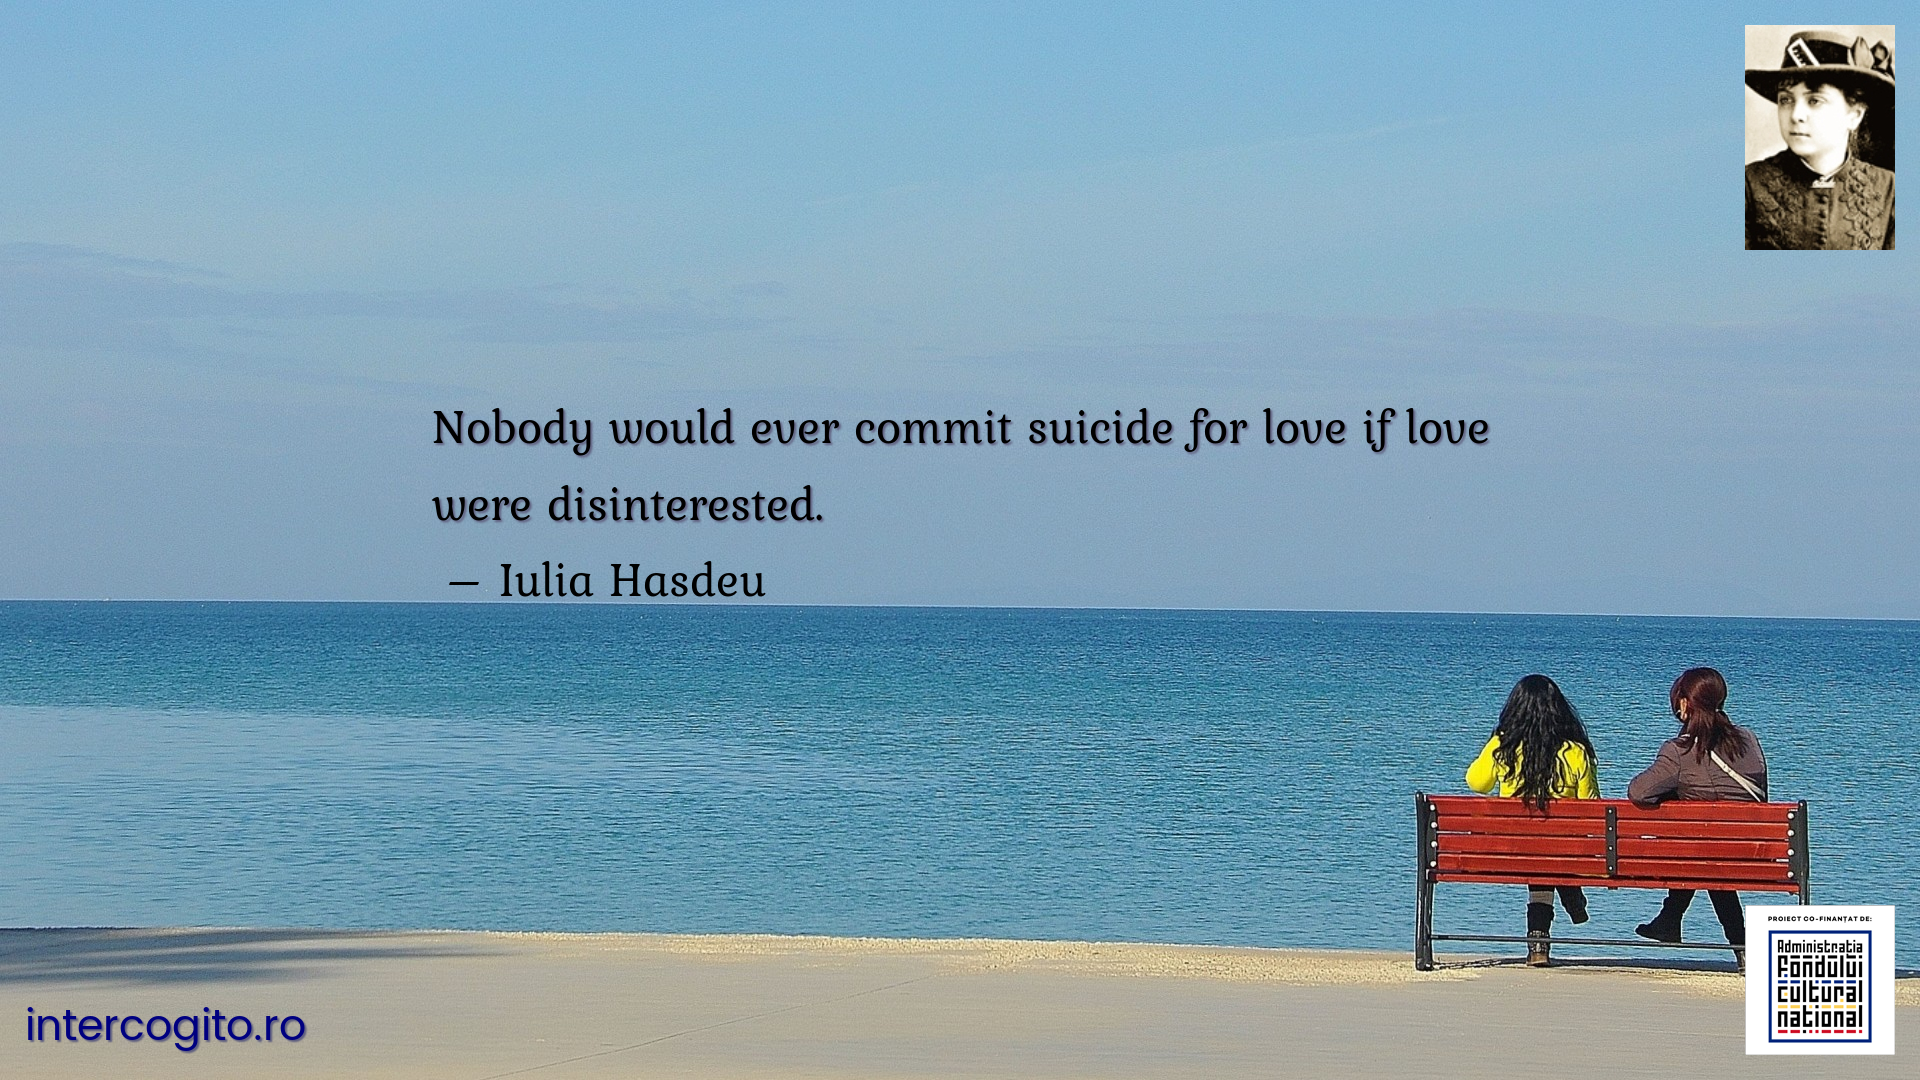 Nobody would ever commit suicide for love if love were disinterested.